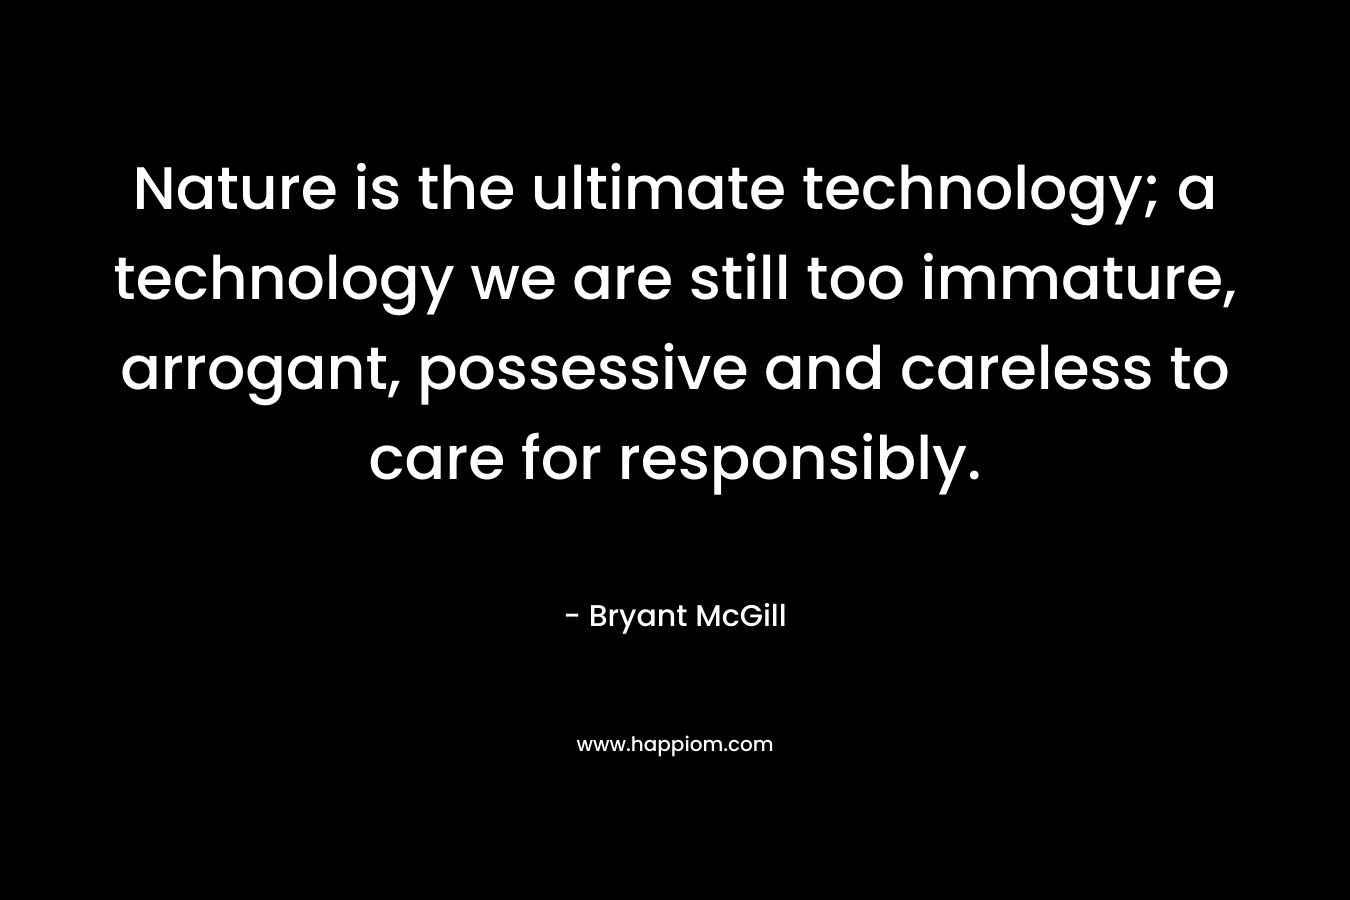 Nature is the ultimate technology; a technology we are still too immature, arrogant, possessive and careless to care for responsibly. – Bryant McGill